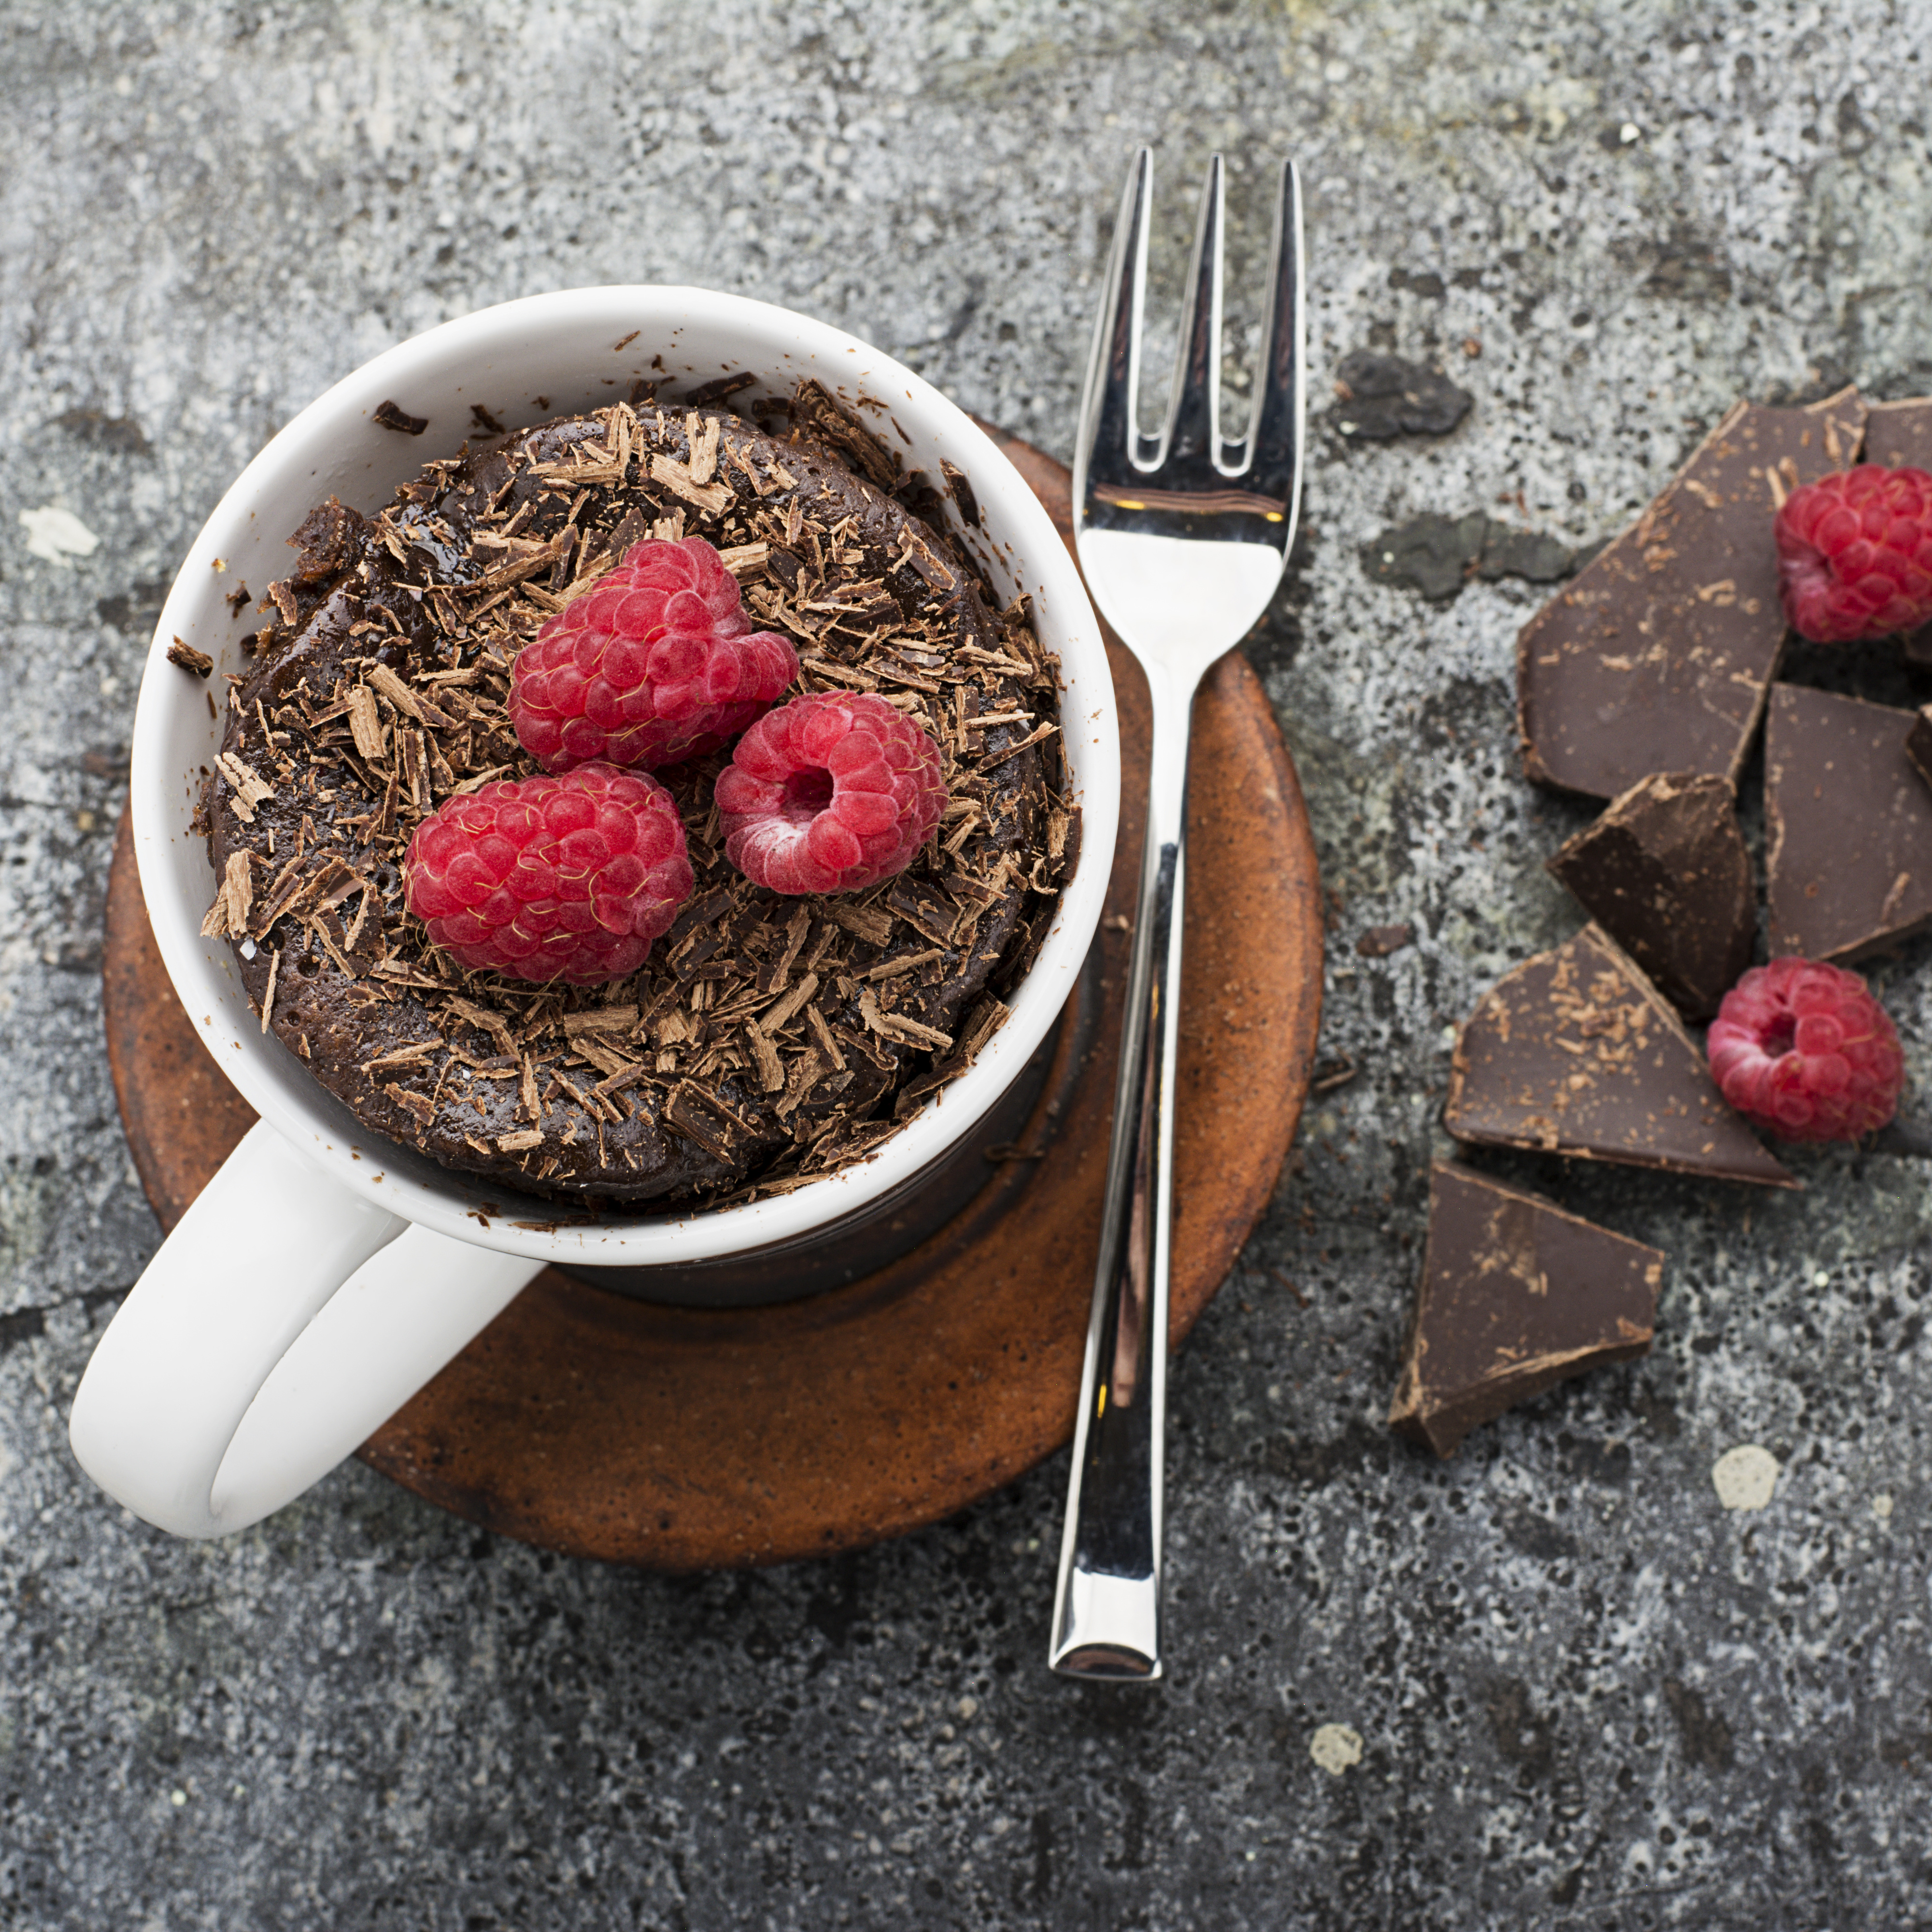 30-Second Chocolate Cake – Just 100 Calories!